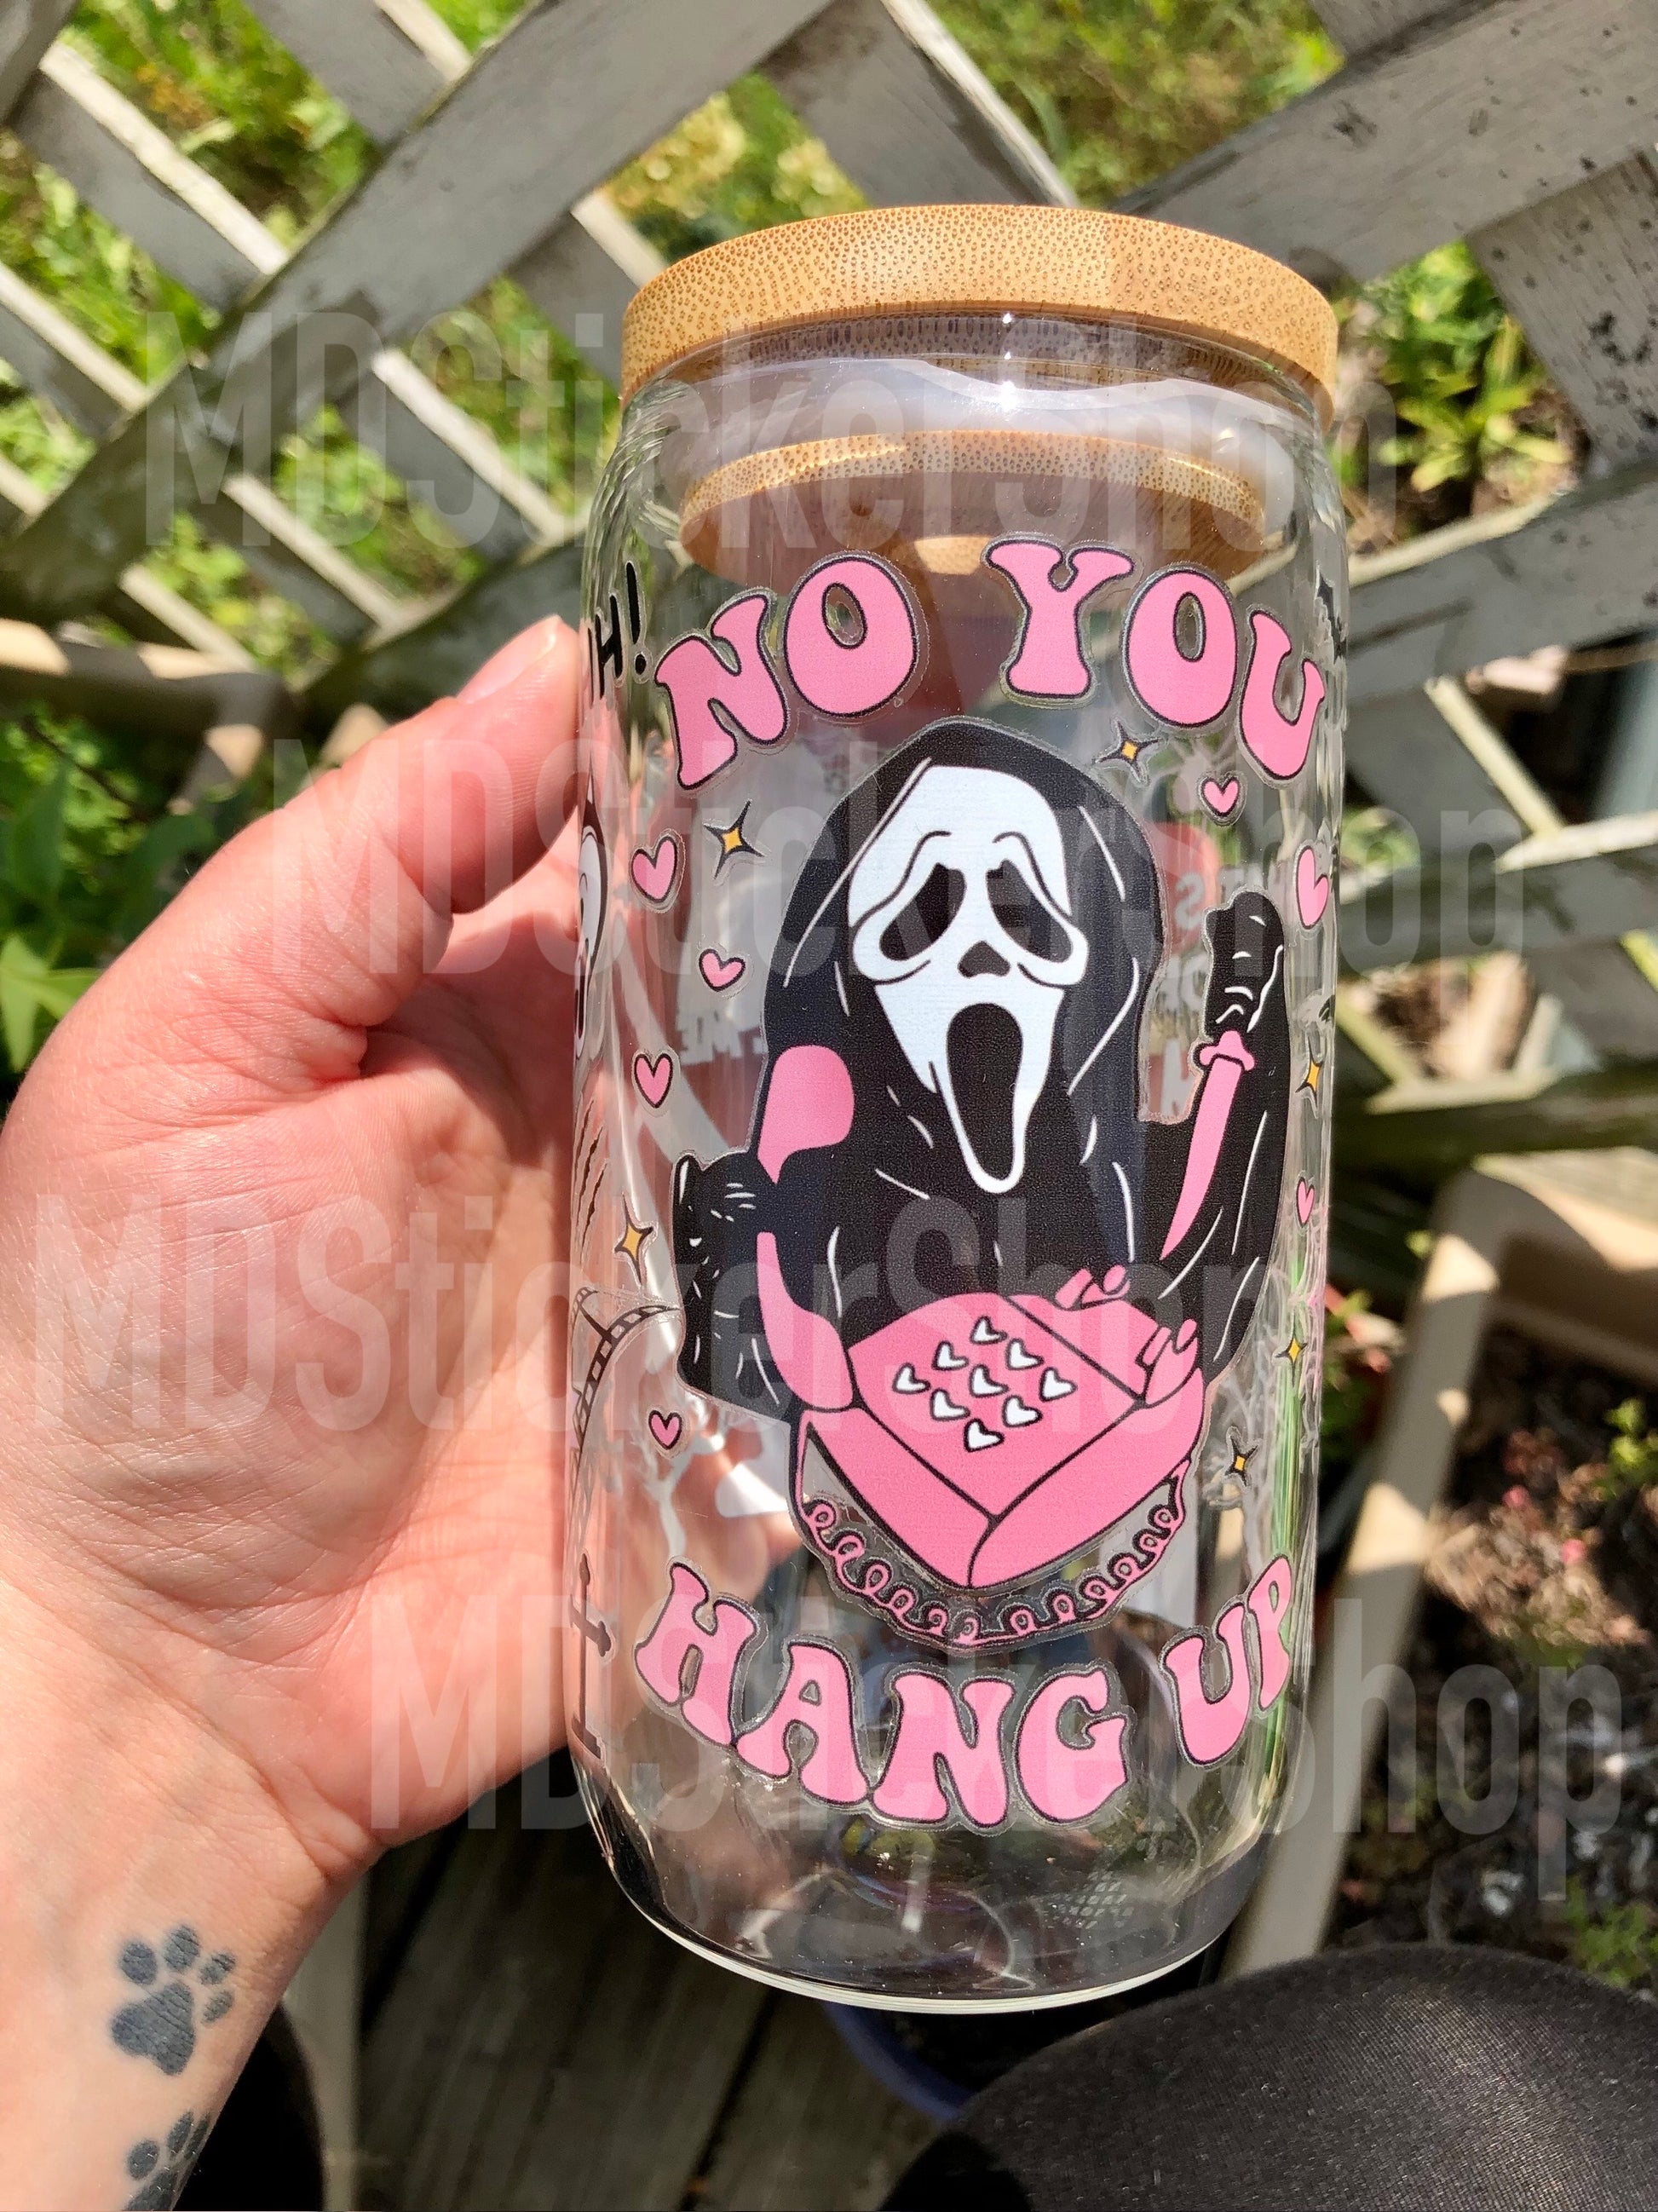 No Ghost Personalized Beer Can Glass from Ghostbusters